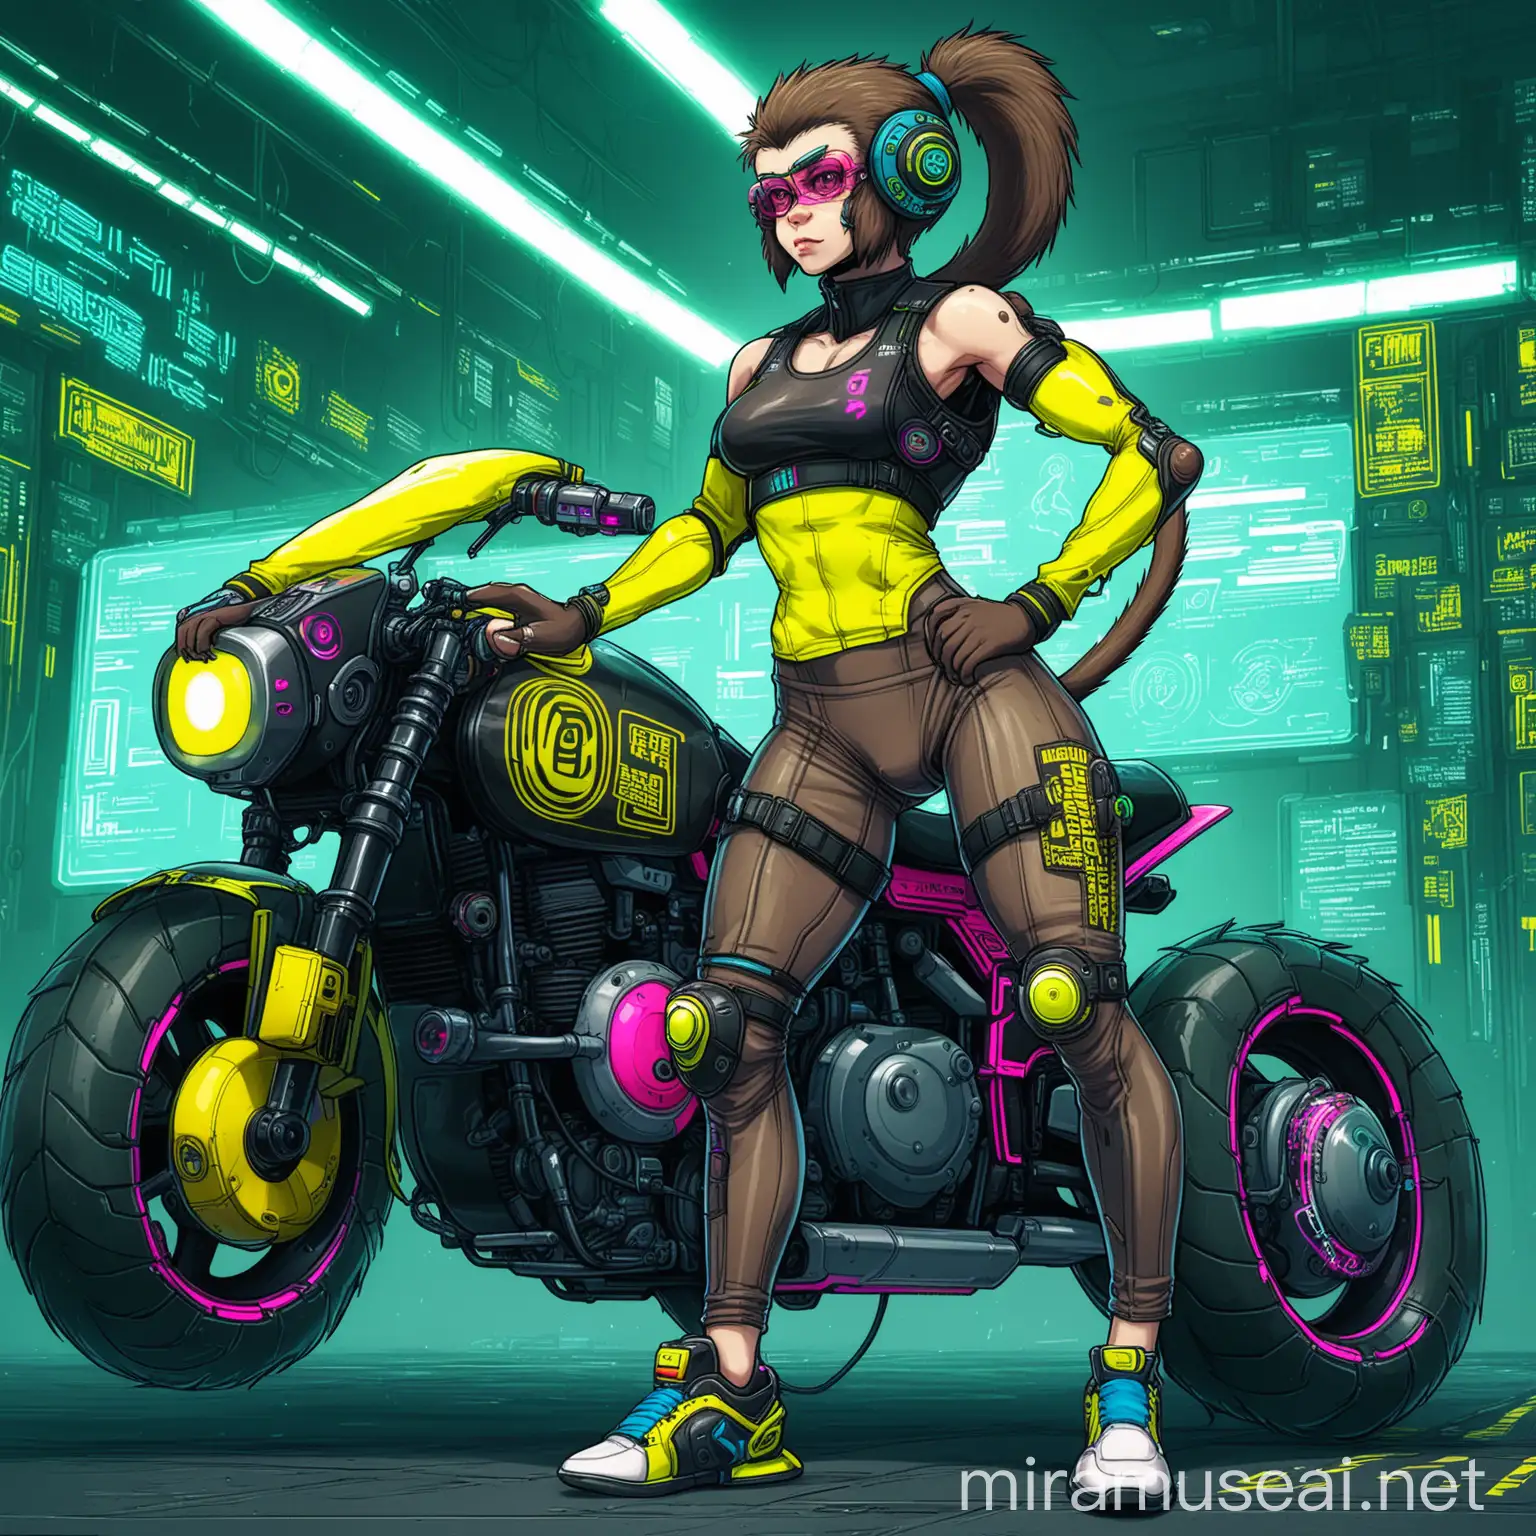 cyberpunk female monkey athlete with monkeytail and Motorcyclearmor as clothes